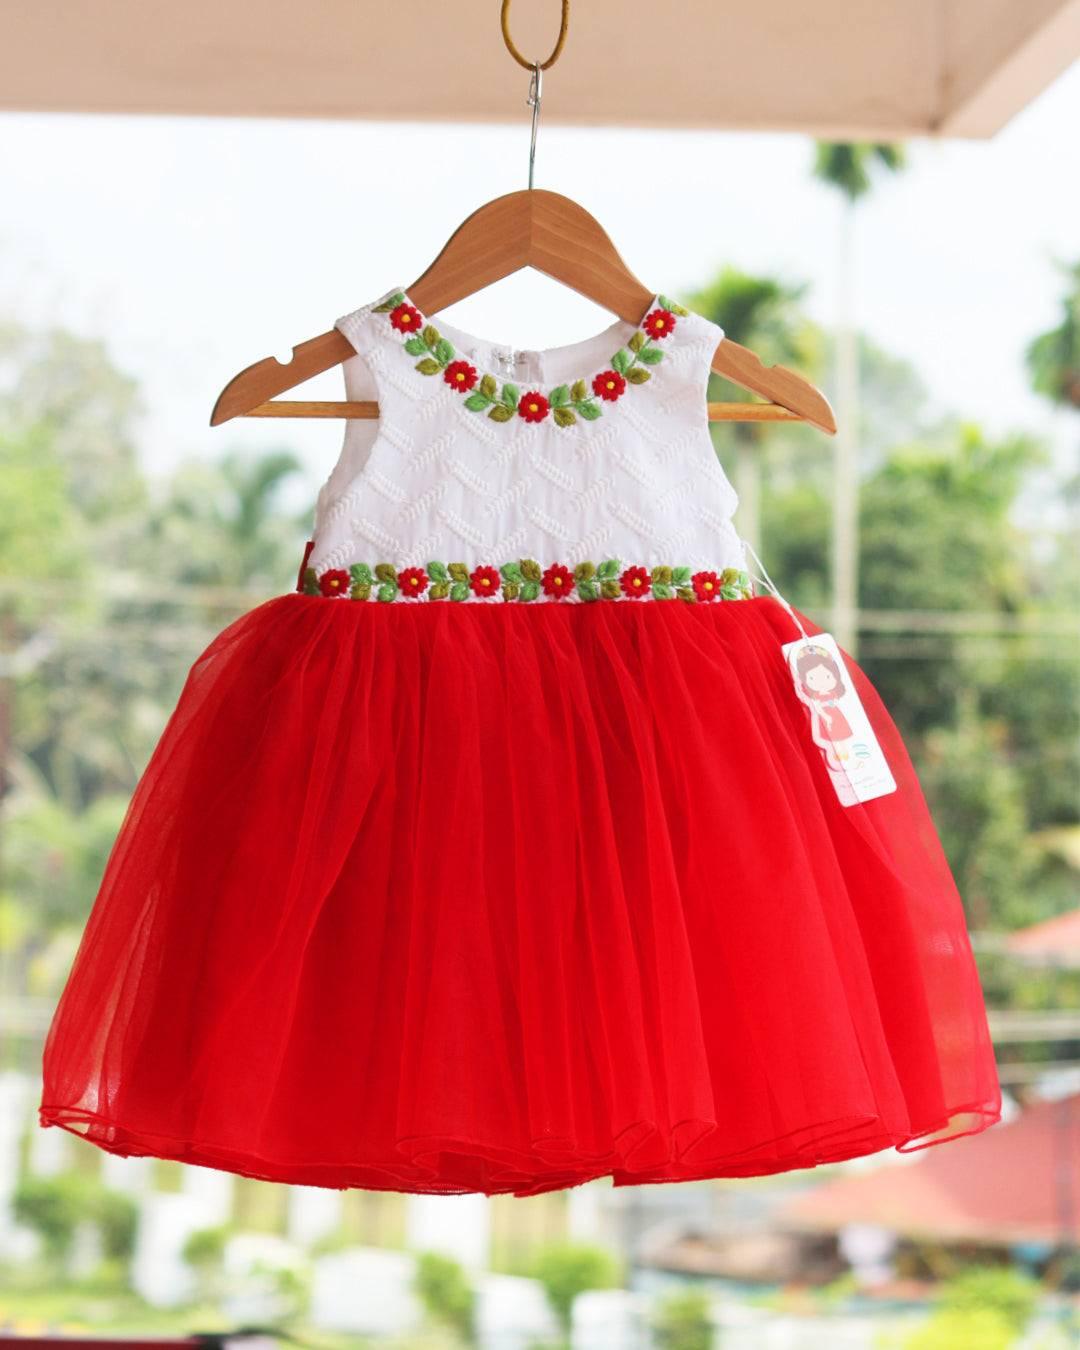 Red & White Thread Embroidery Frock
Material: Red colour soft nylon net material with matching premium ultra satin as lining.Yoke portion is designed with white colour soft hakoba fabric with multicol